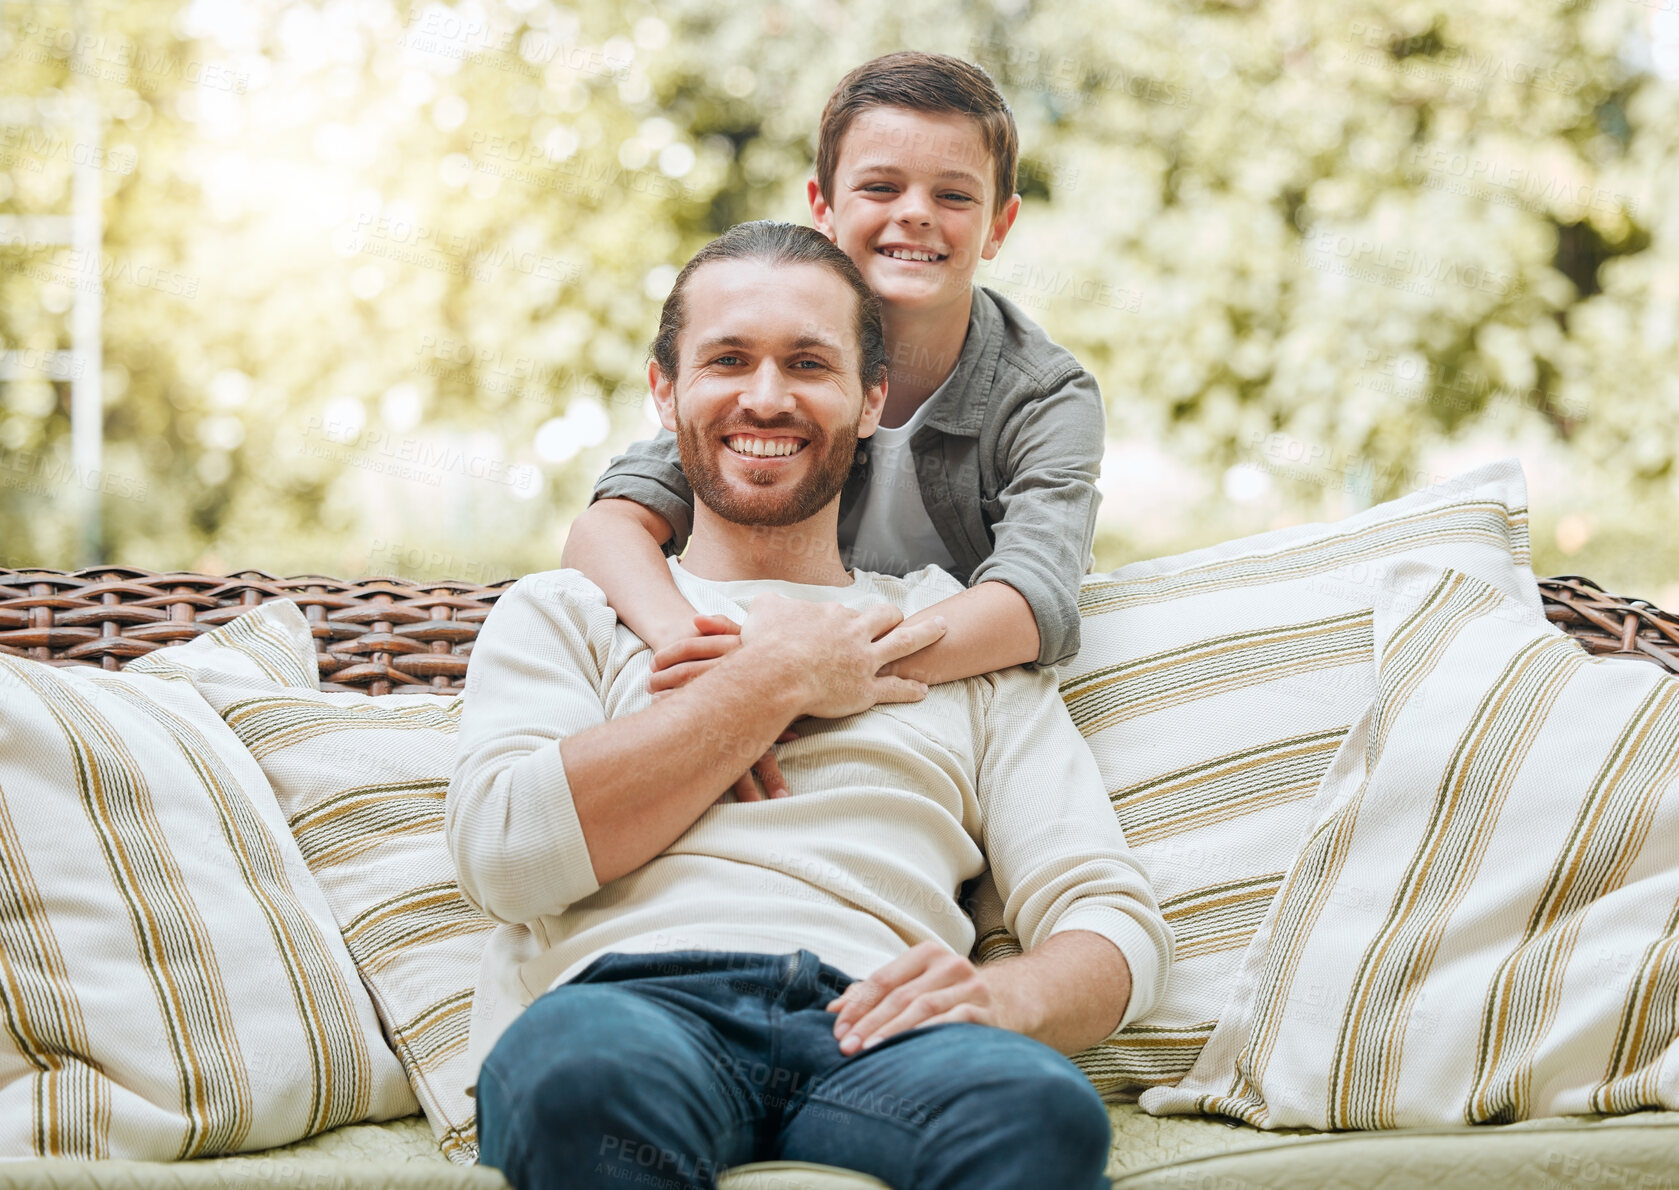 Buy stock photo Shot of a handsome young man sitting outside with his son